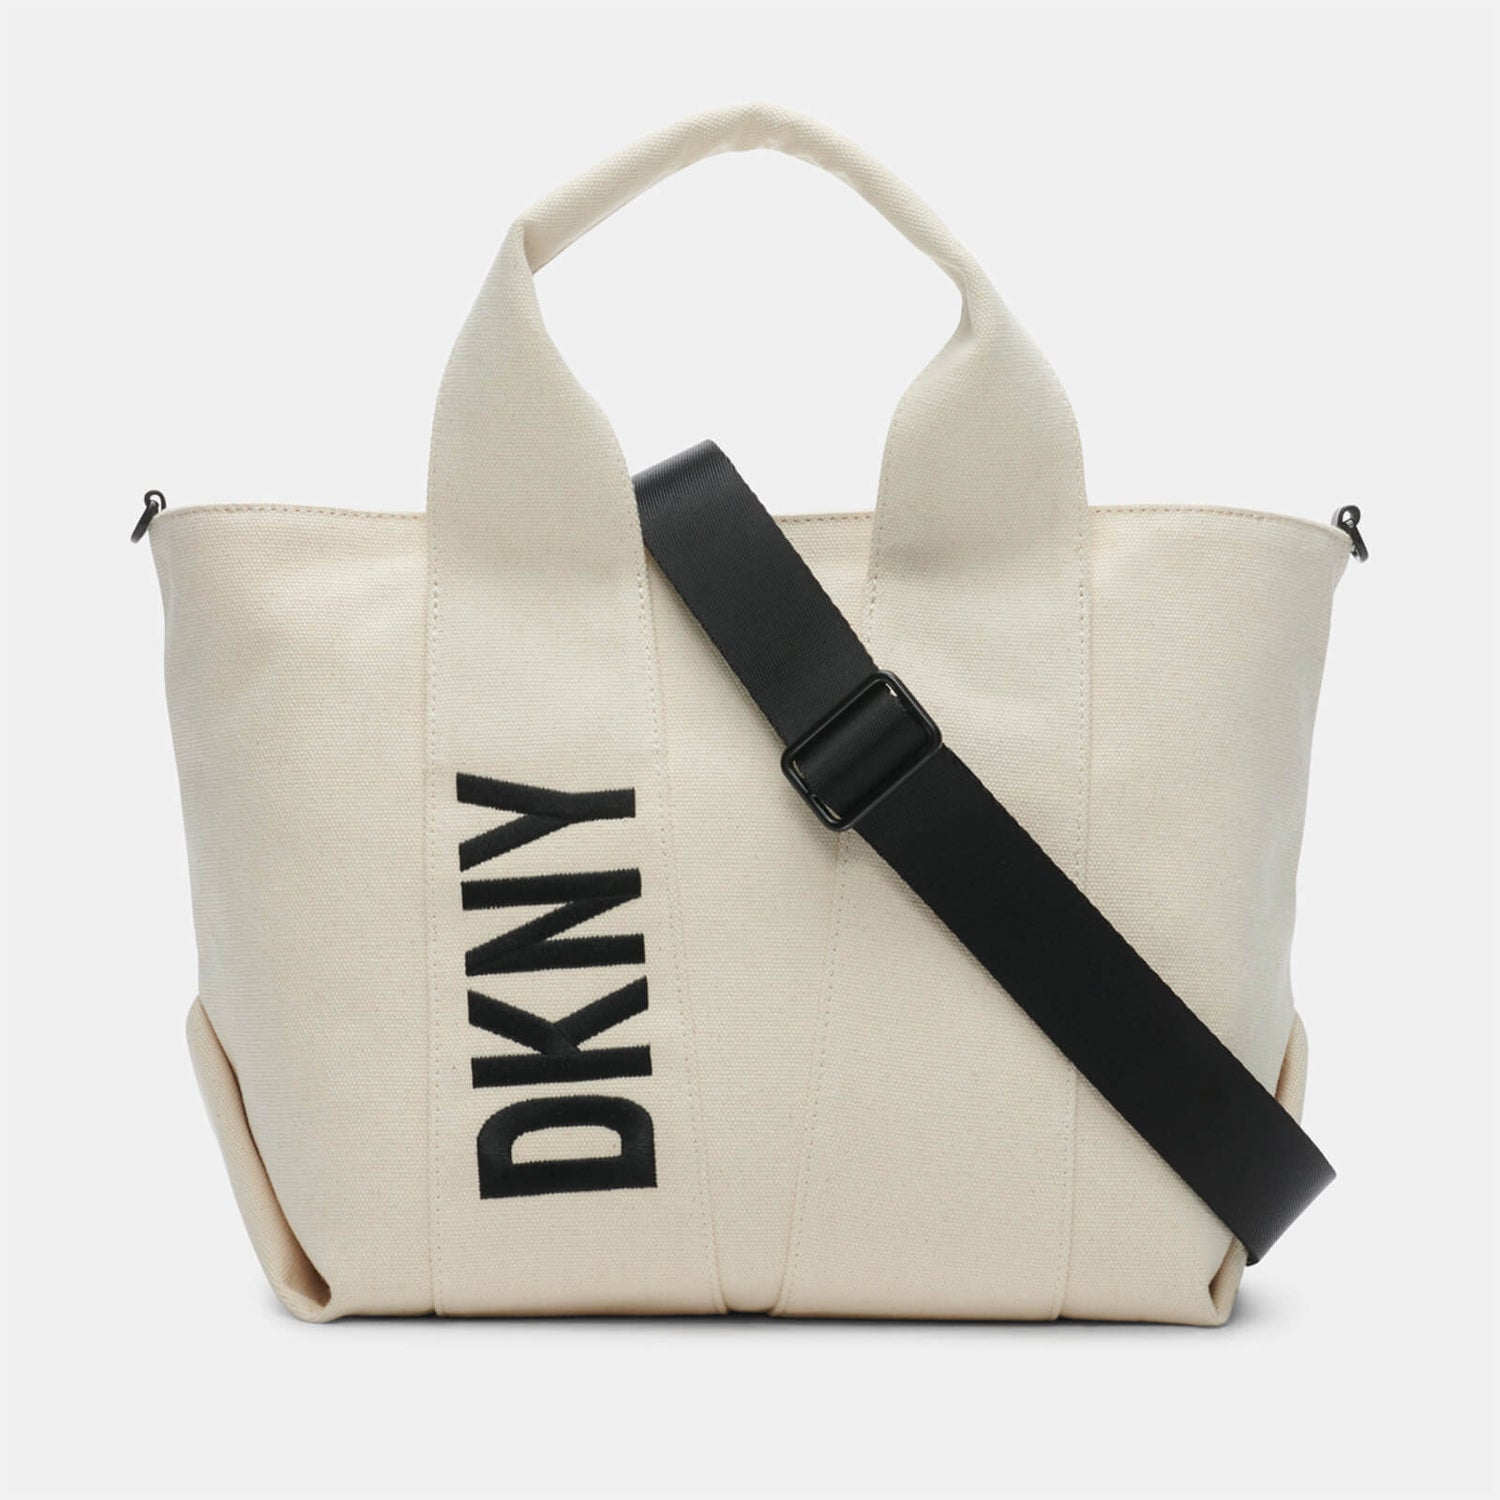 DKNY Women's Rue Large Tote Bag - Natural